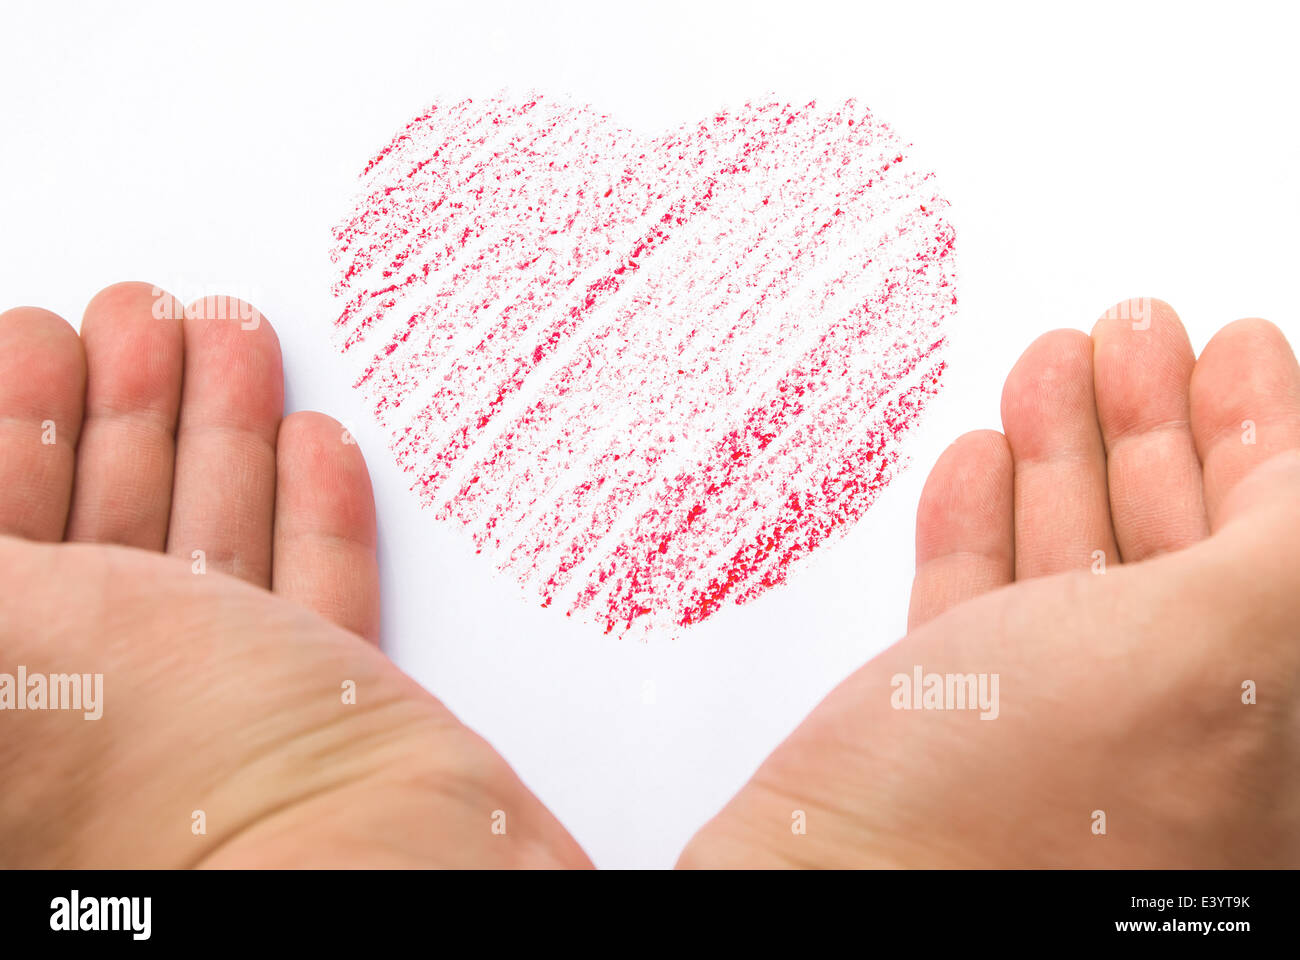 hands holding a heart sketch Stock Photo